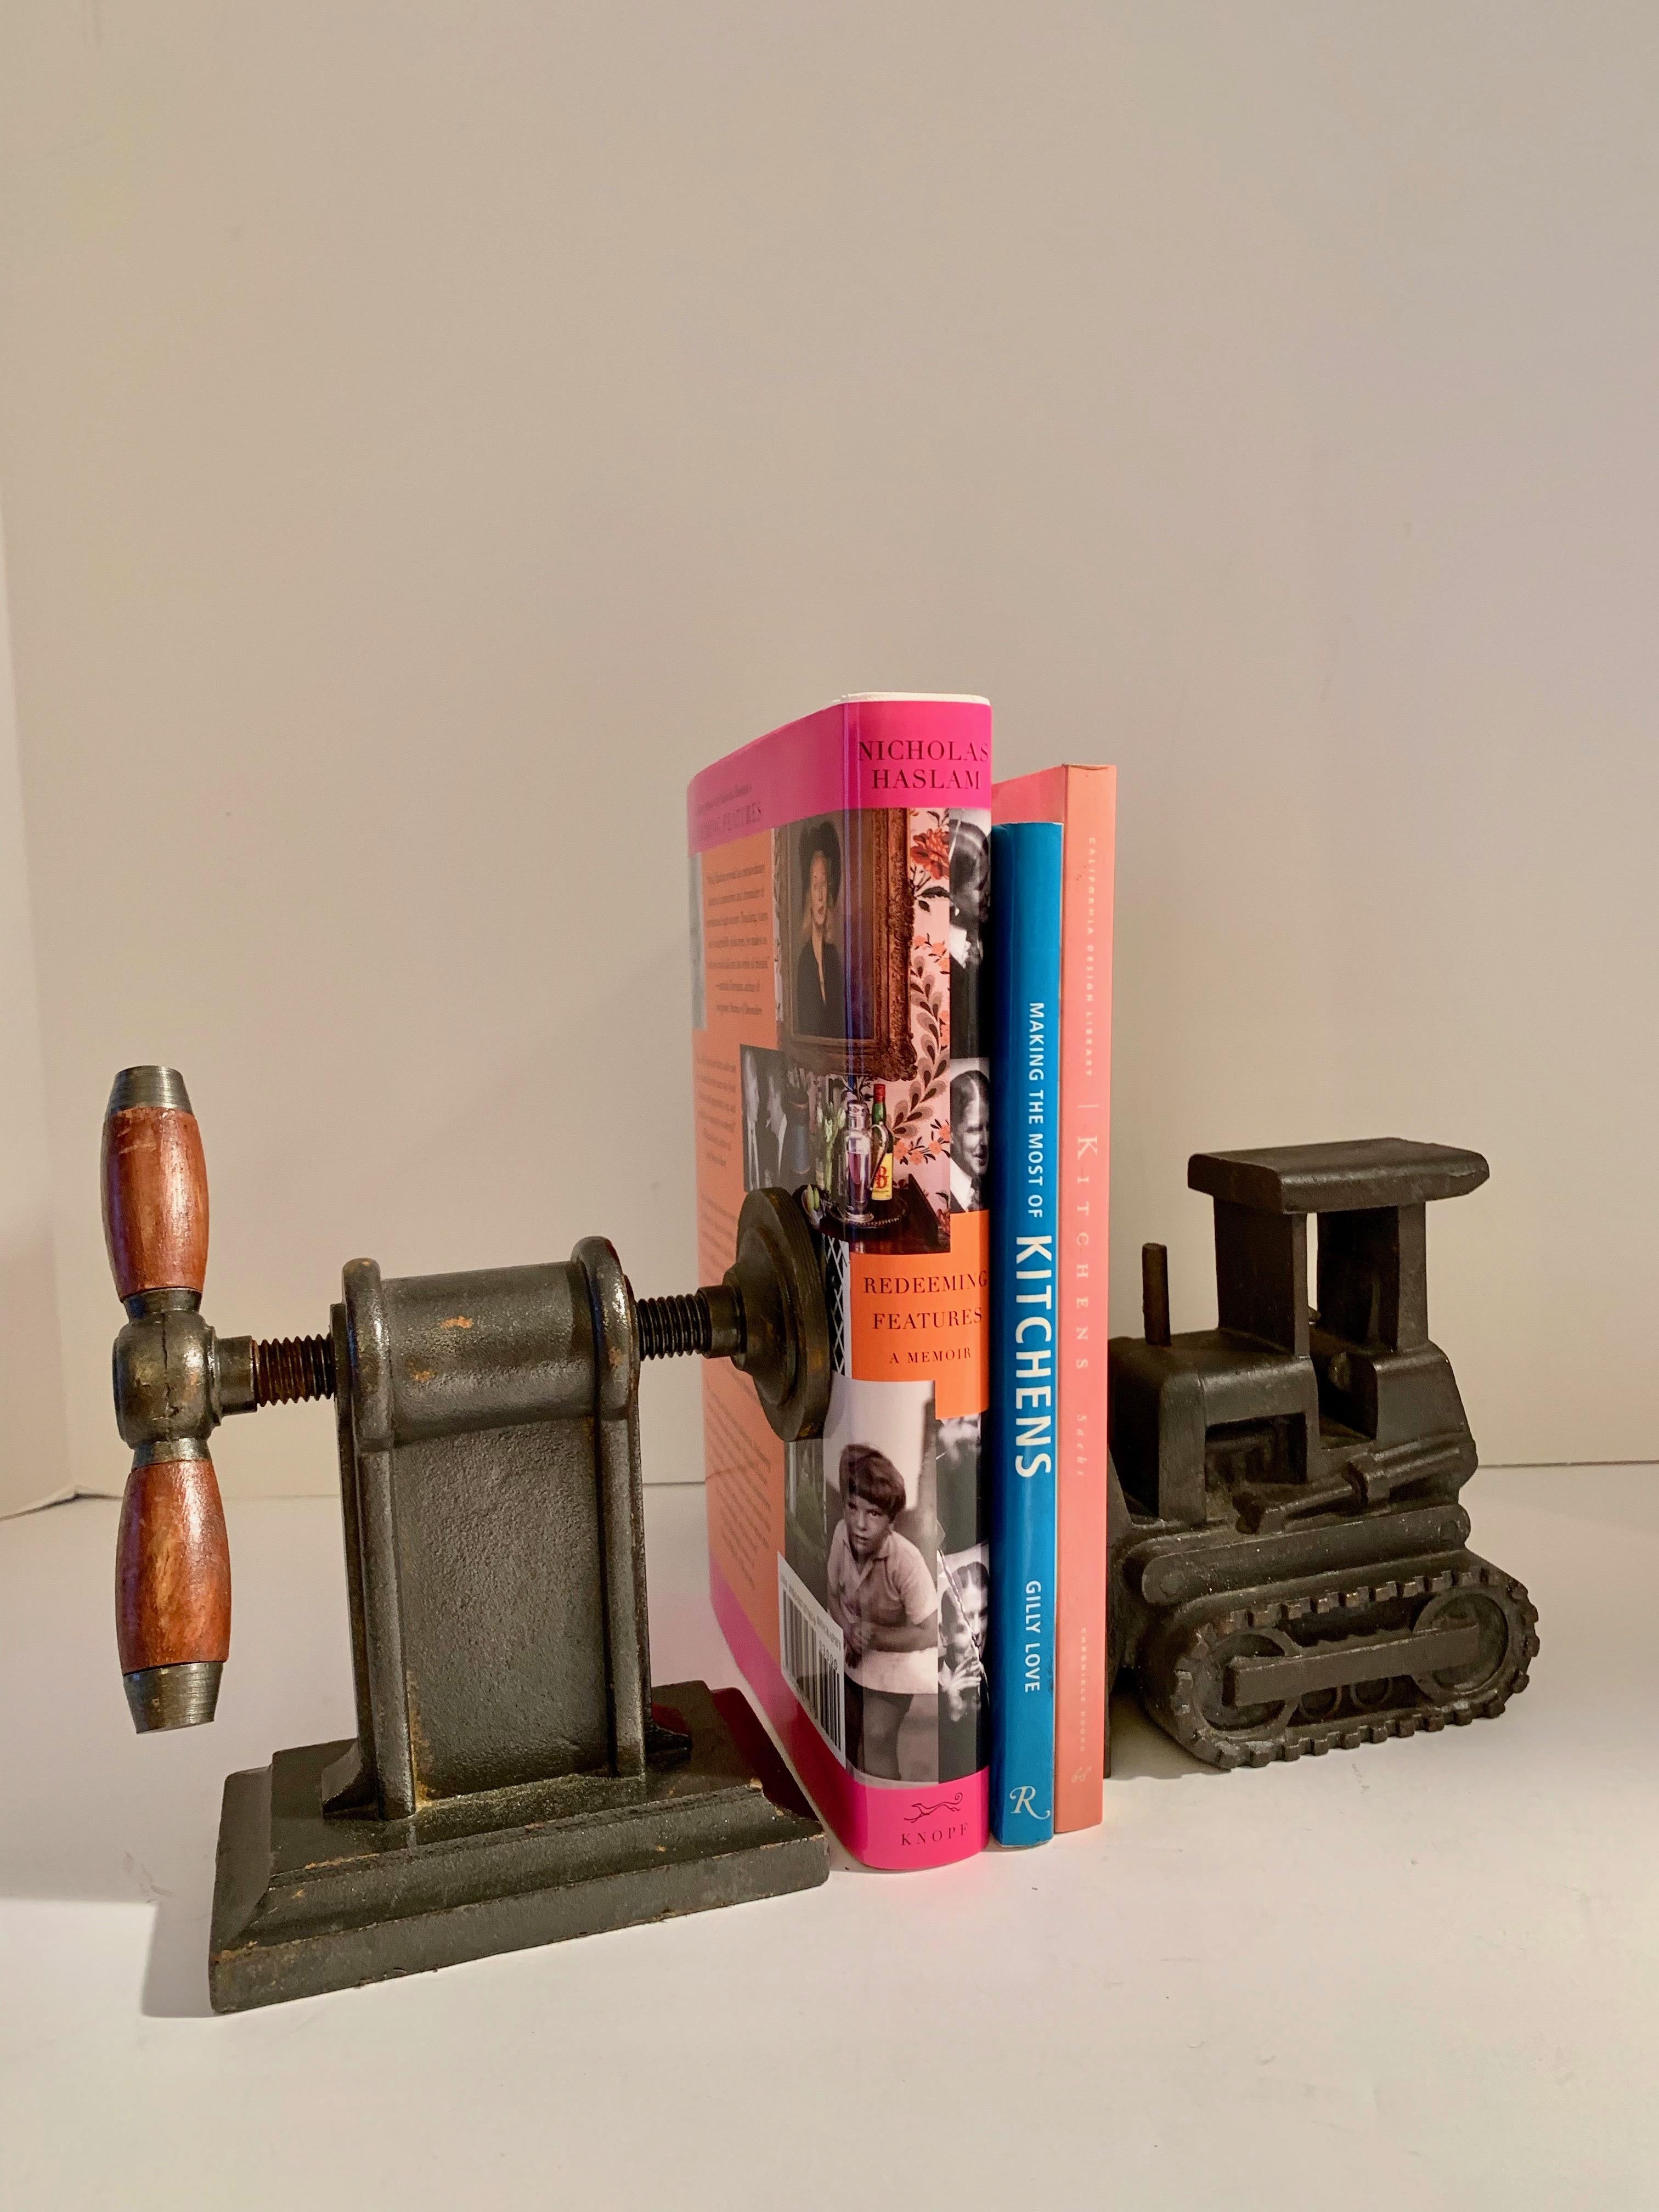 Pair of iron industrial bookends - both pieces heavy iron... one a bull dozer, the other a wood handle crank. Perfectly suited for the kids room, den or office.